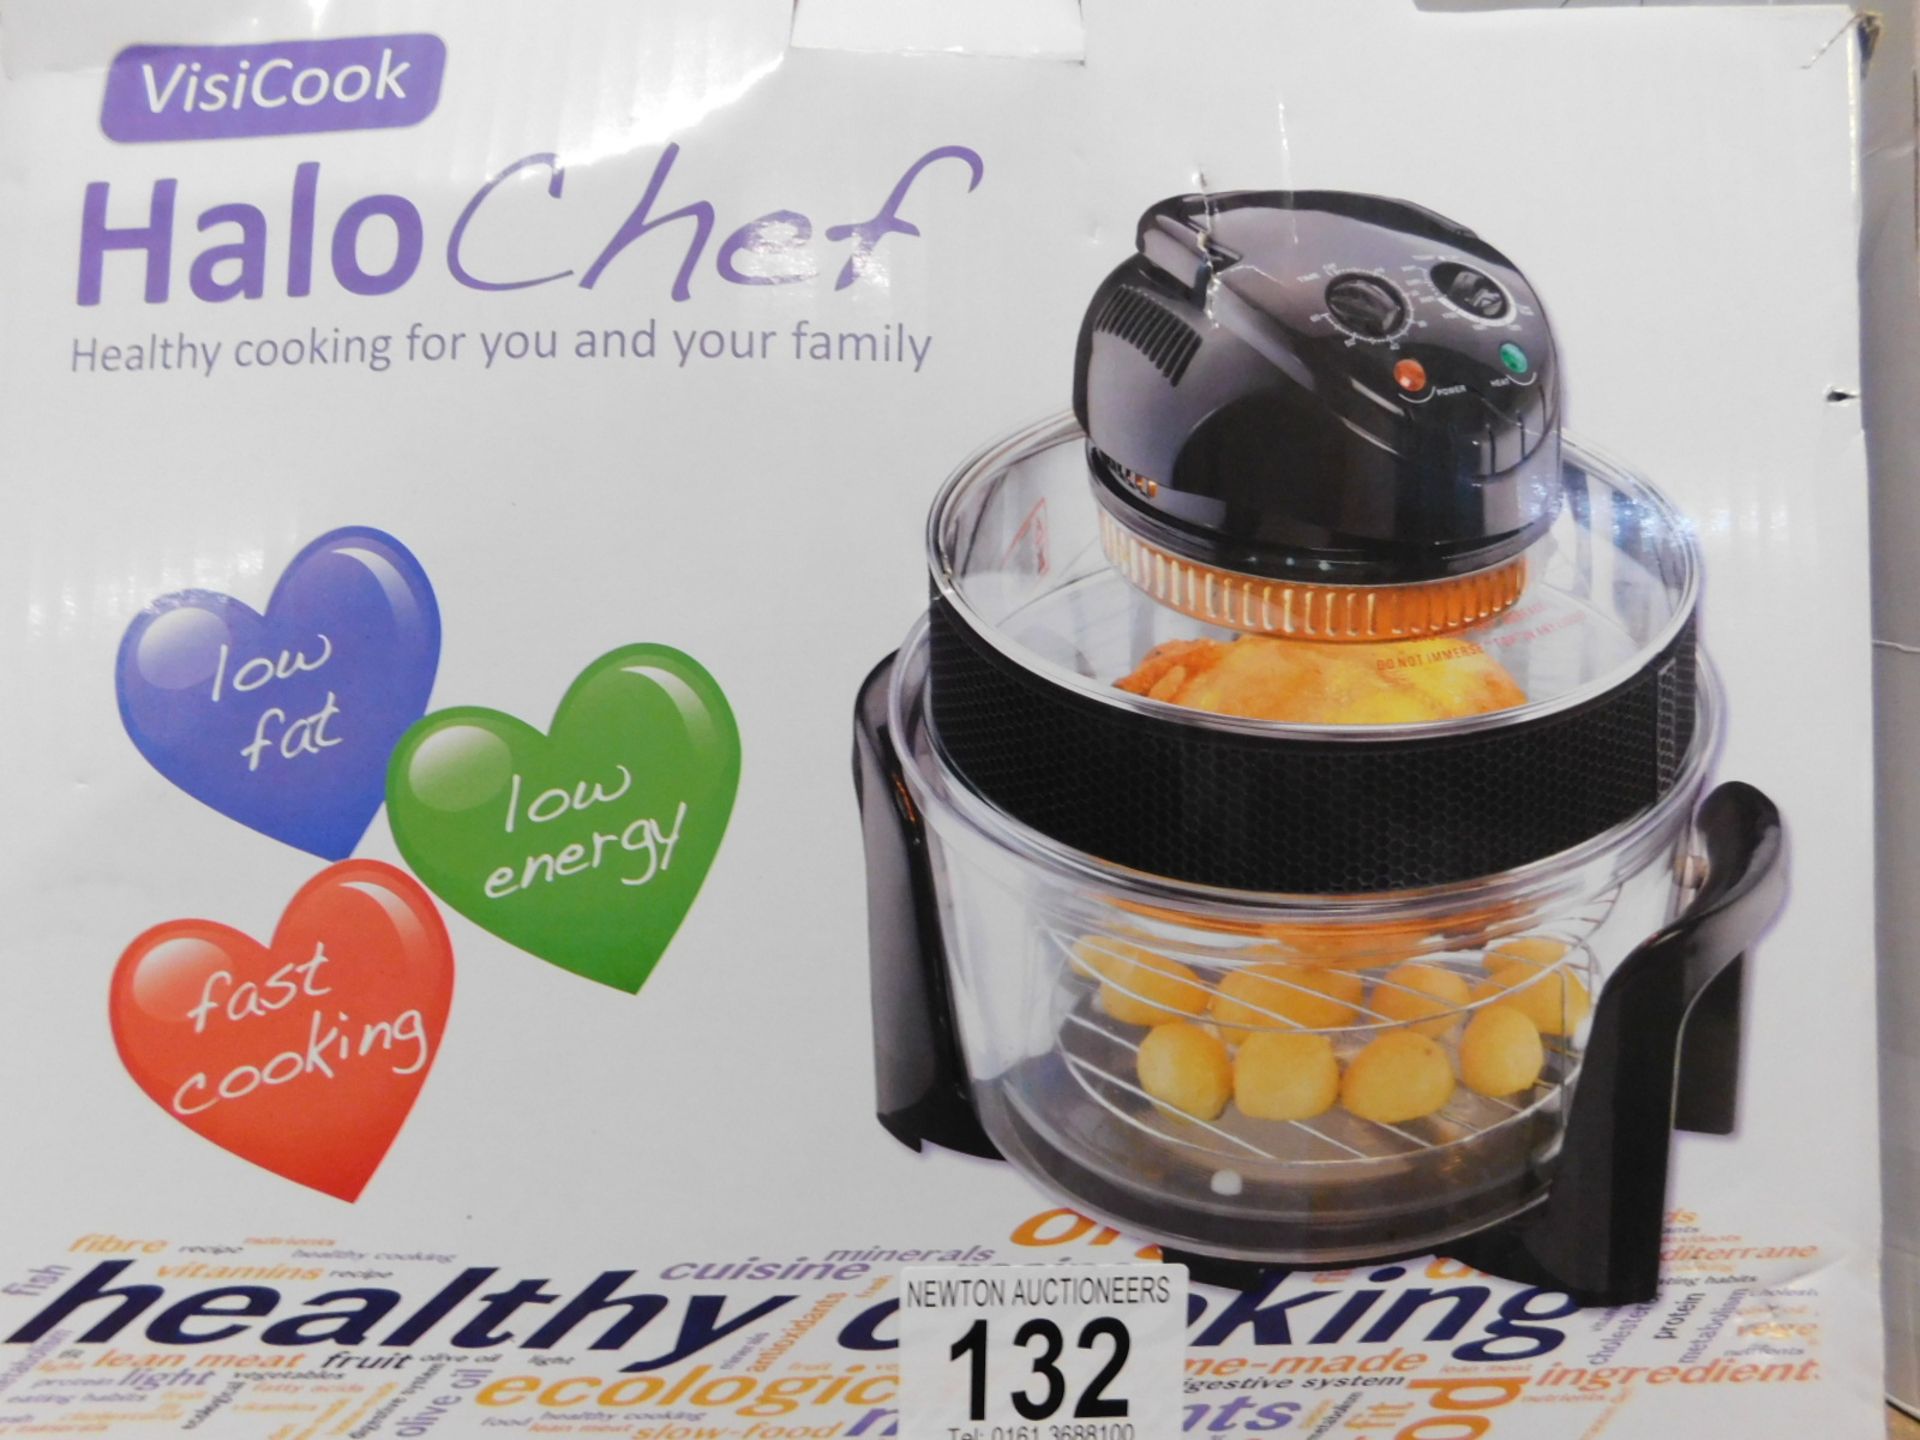 1 BOXED VISICOOK HALO CHEF HALOGEN COOKER RRP £89.99